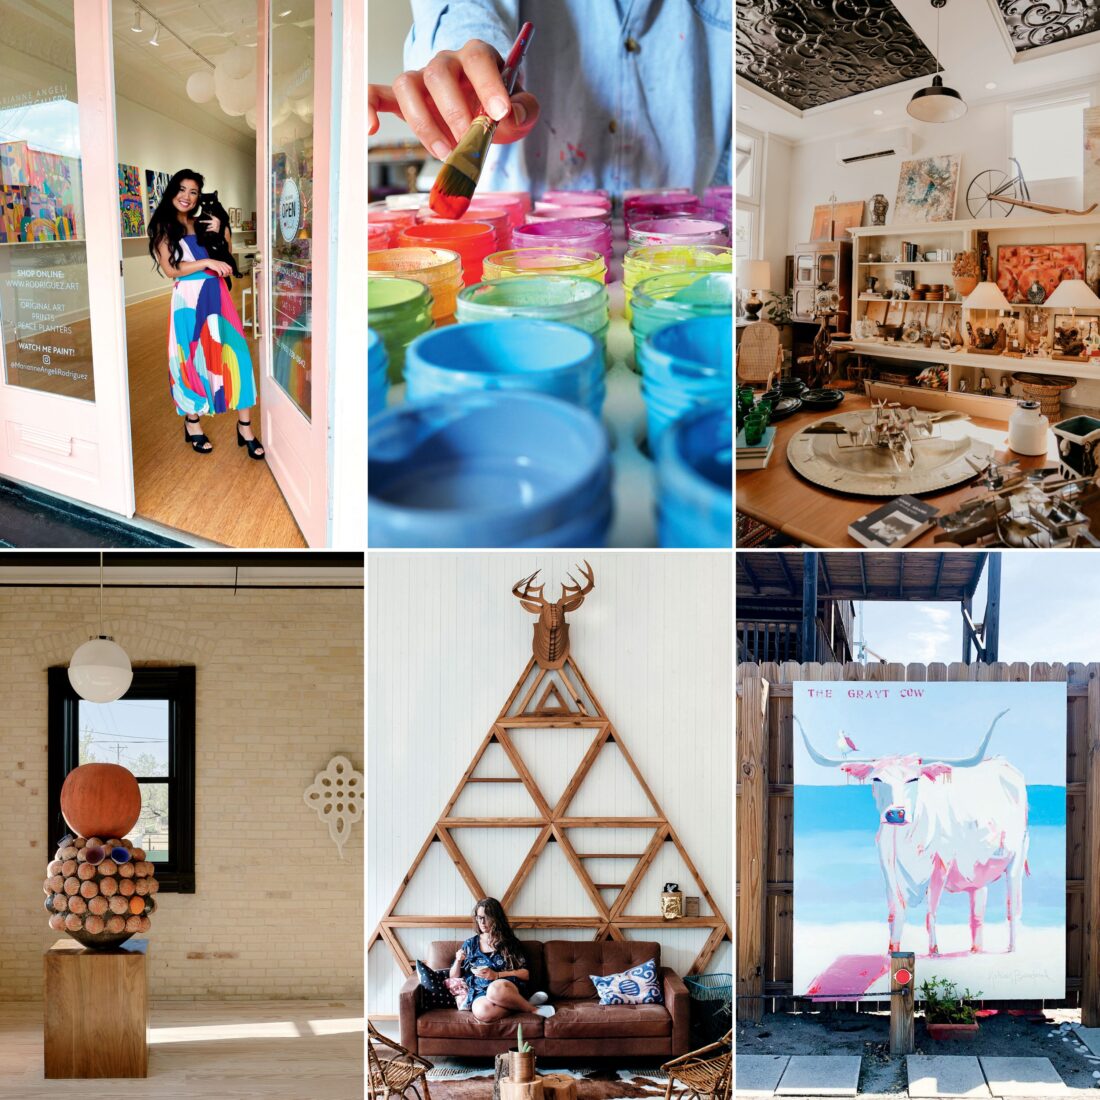 Left to right, from top: A woman stands in a doorway with a black cat and wears a colorful dress; a rainbow of paint in small glasses; vintage goods on shelves in a store; a painting of a cow outside; inside a social hall with white paneled walls and a leather couch; a sculpture with two round pieces stacked on a wood cube.